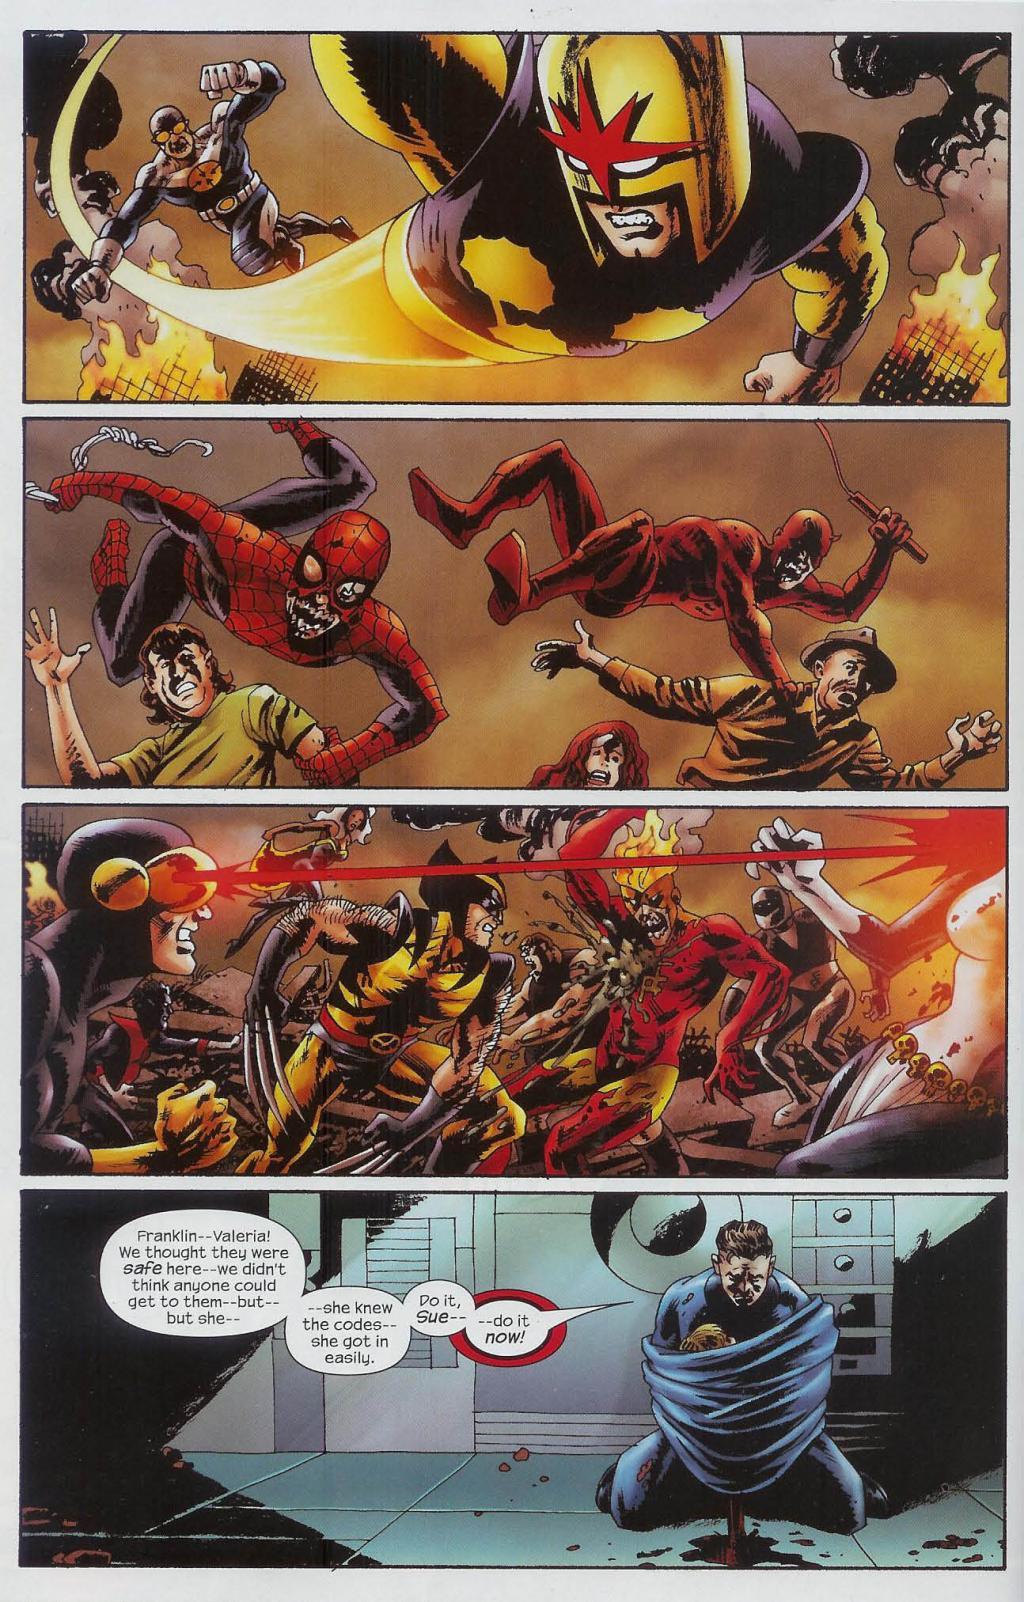 Marvel Zombies: Dead Days #7